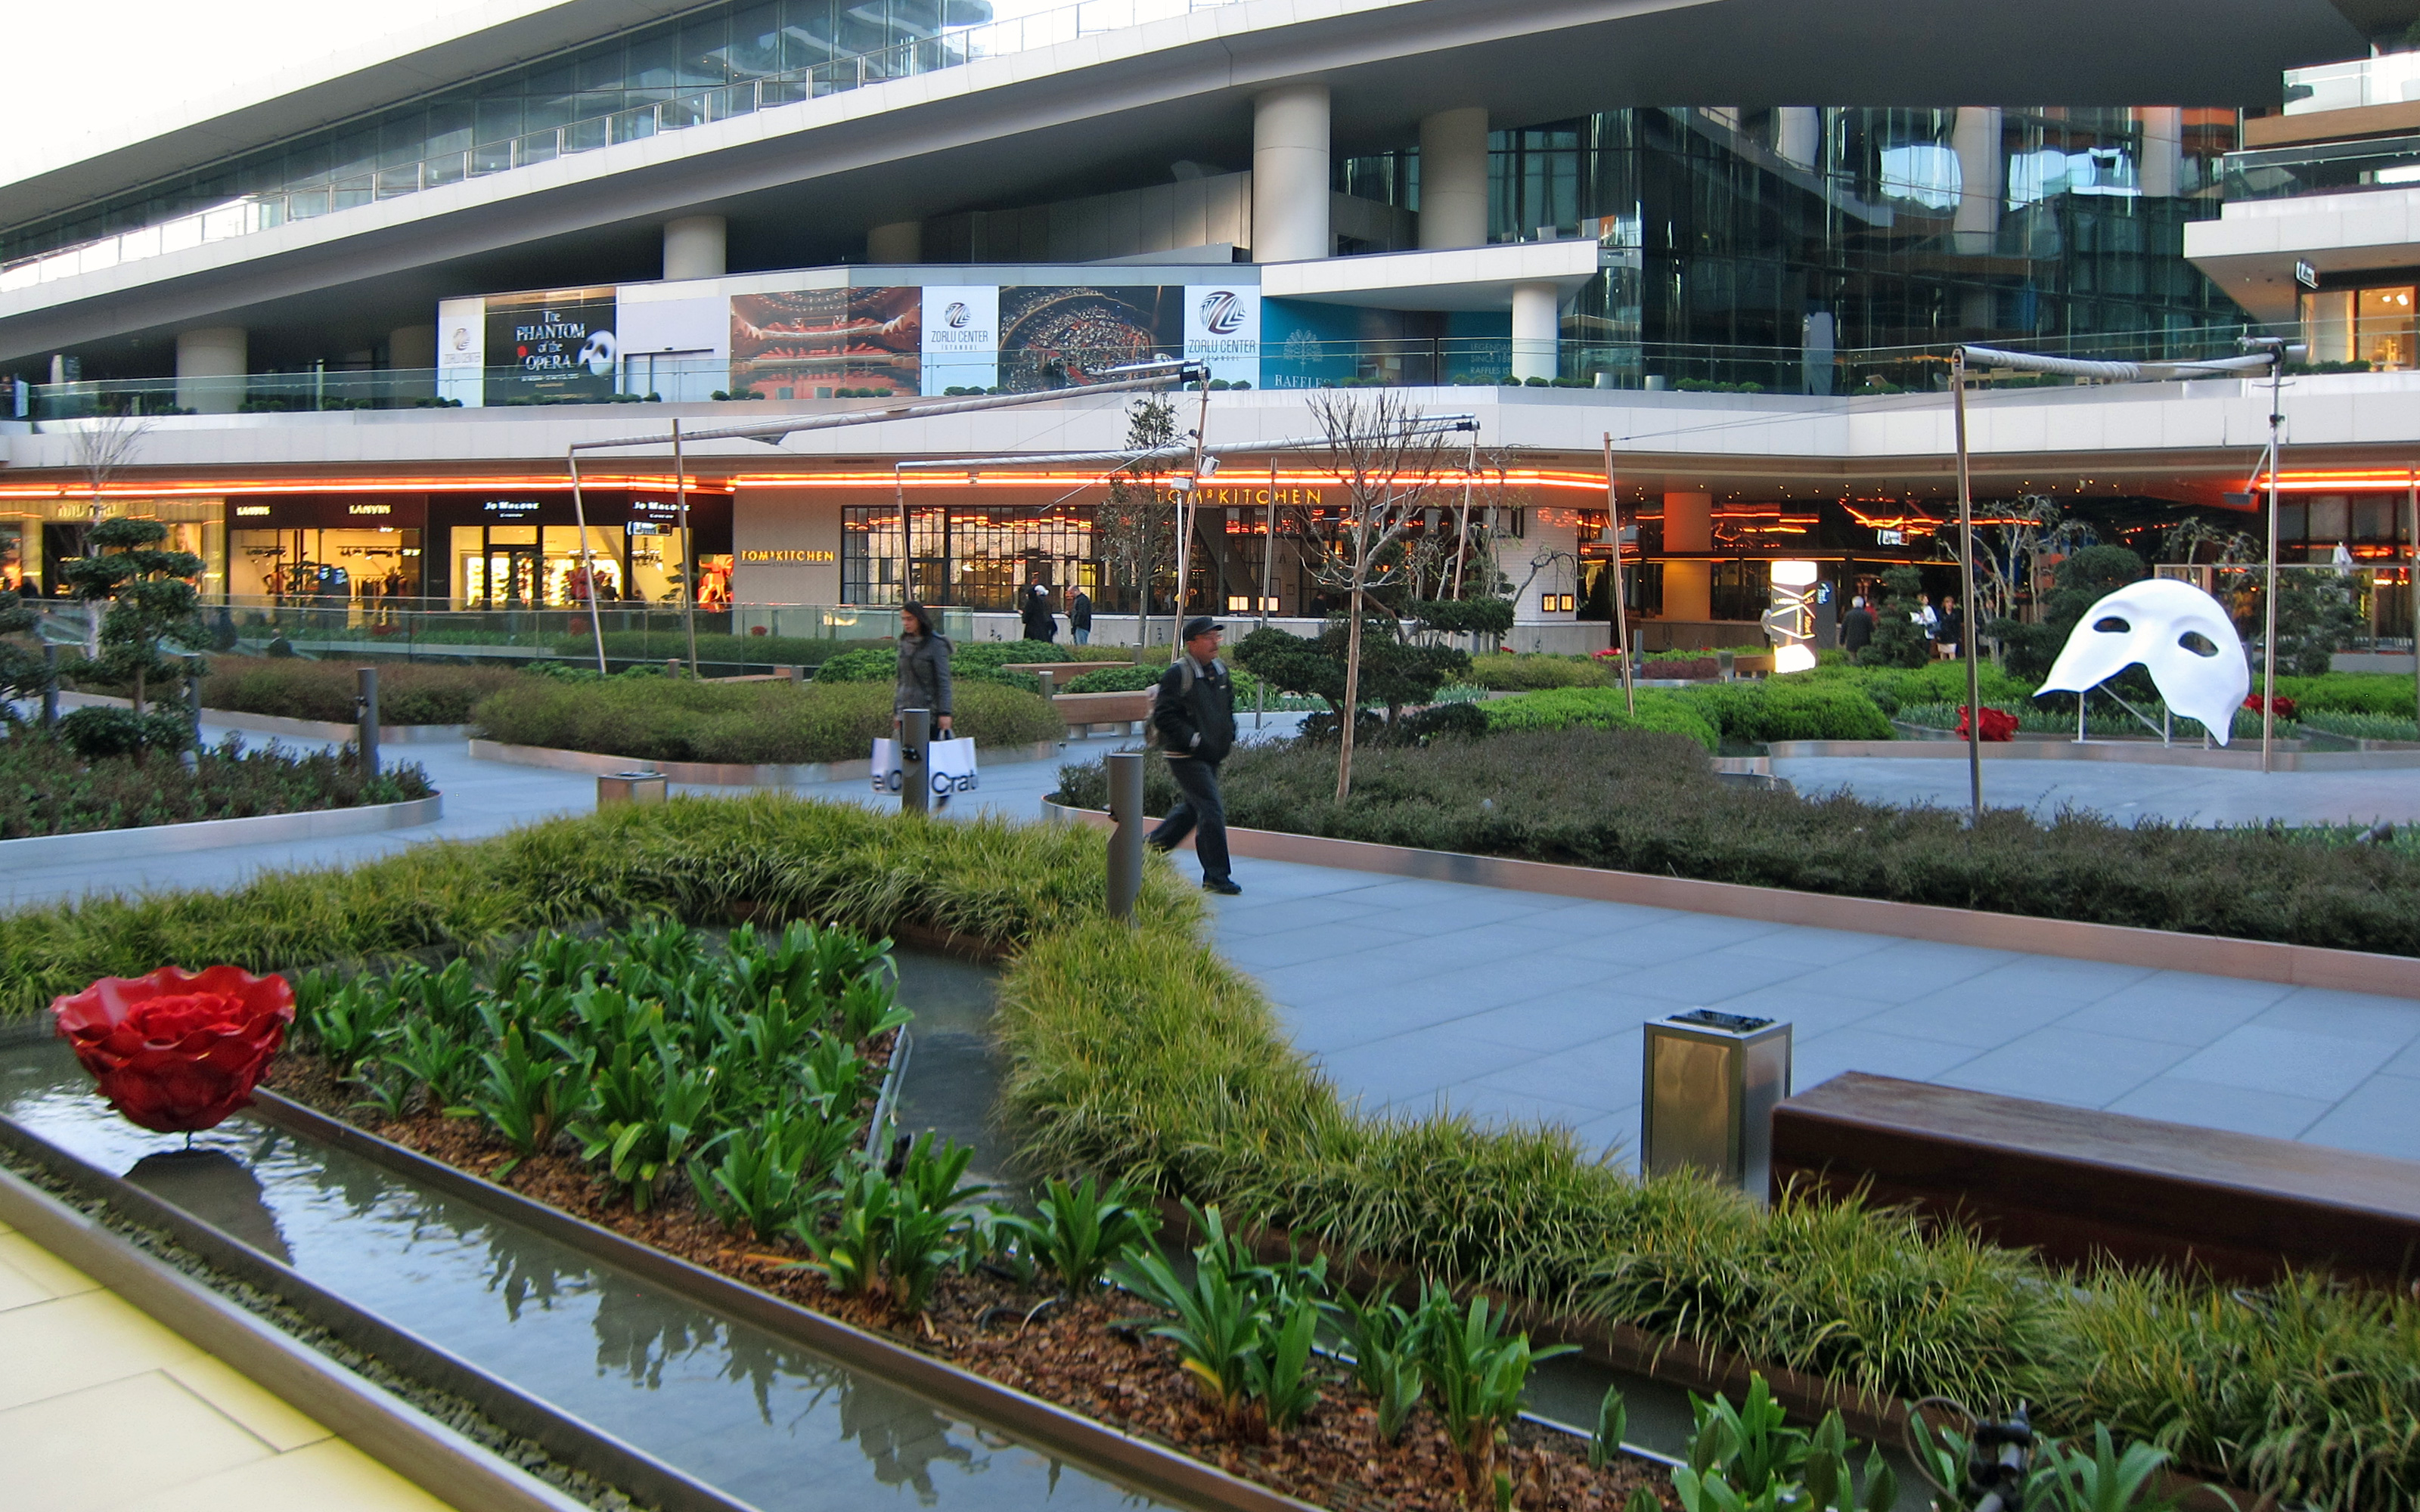 Shopping mall with plant beds and water features